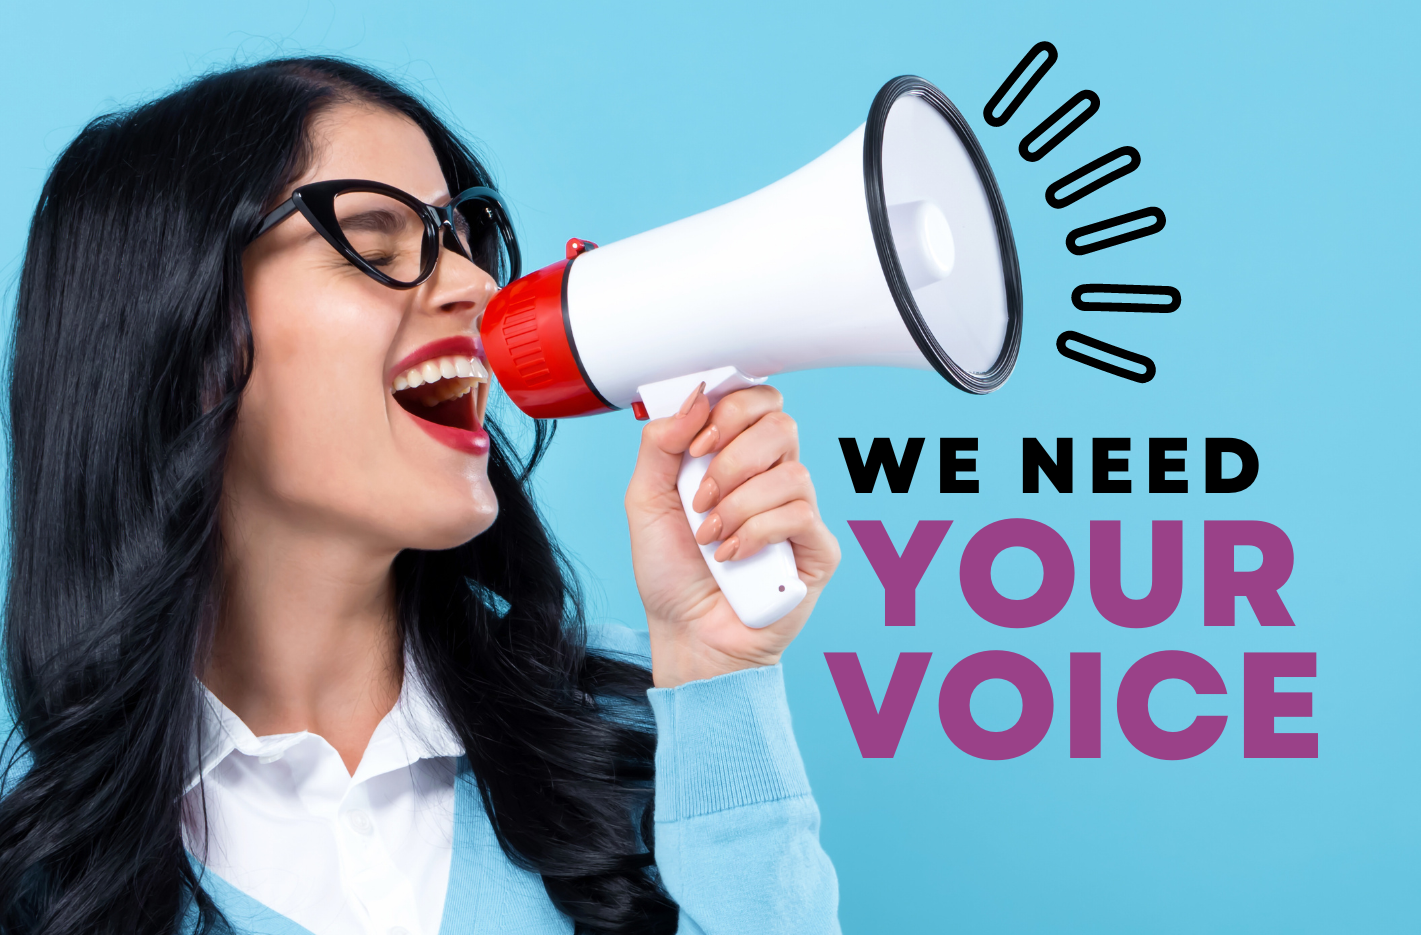 We need your voice! That’s right, YOU!